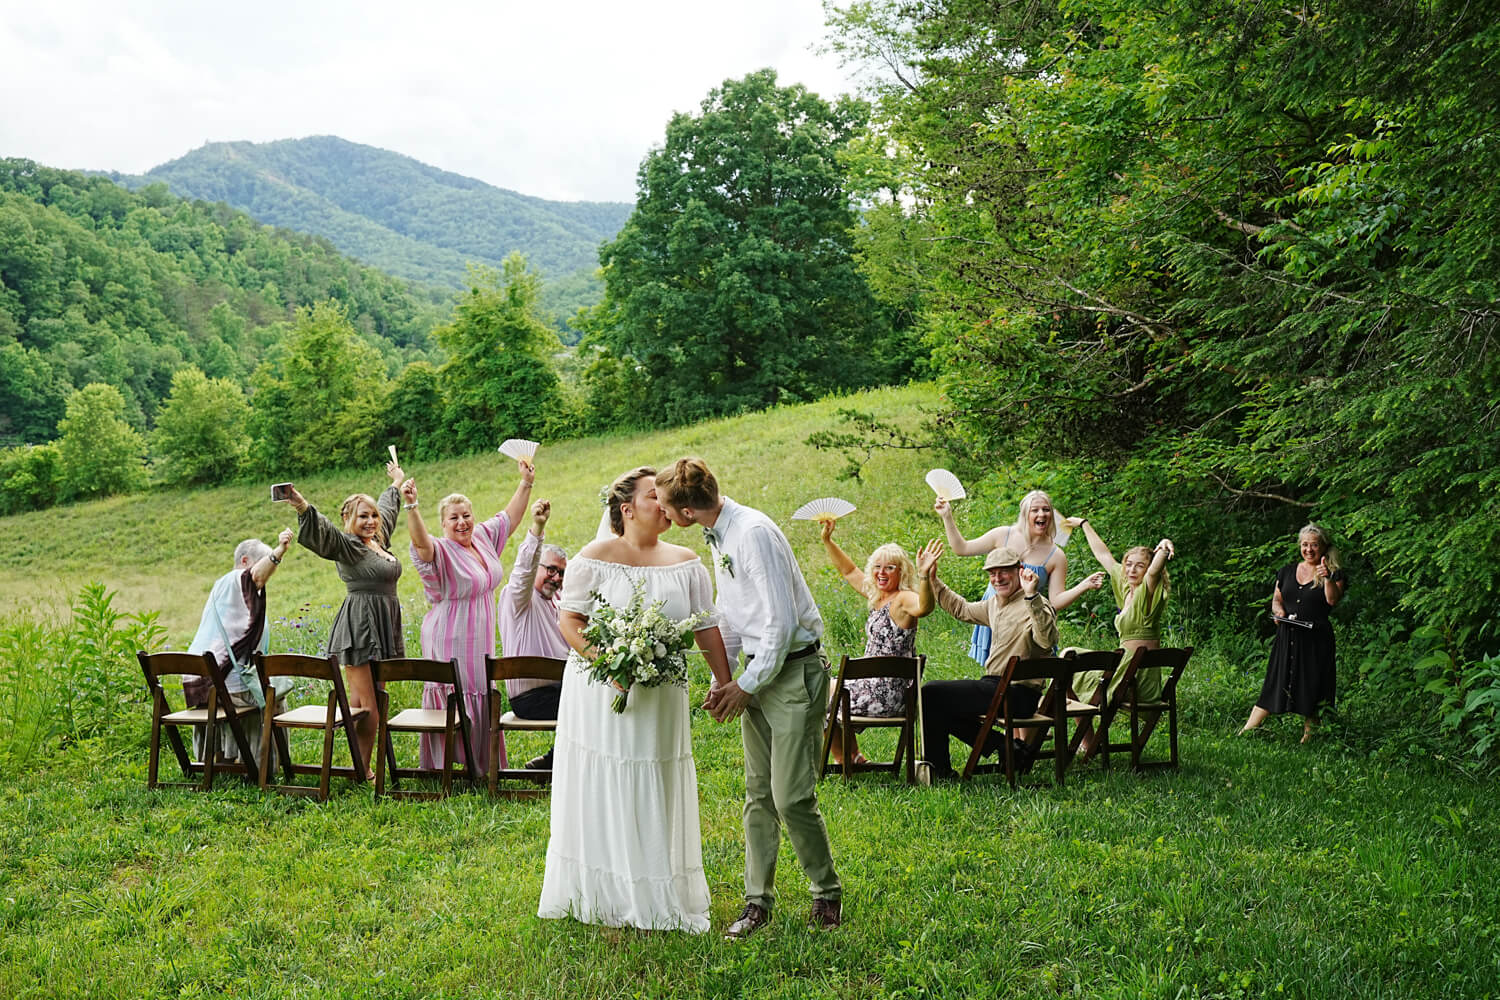 Wedding guests waving their hands in celebration as the couple kisses in front of a mountain view ceremony site